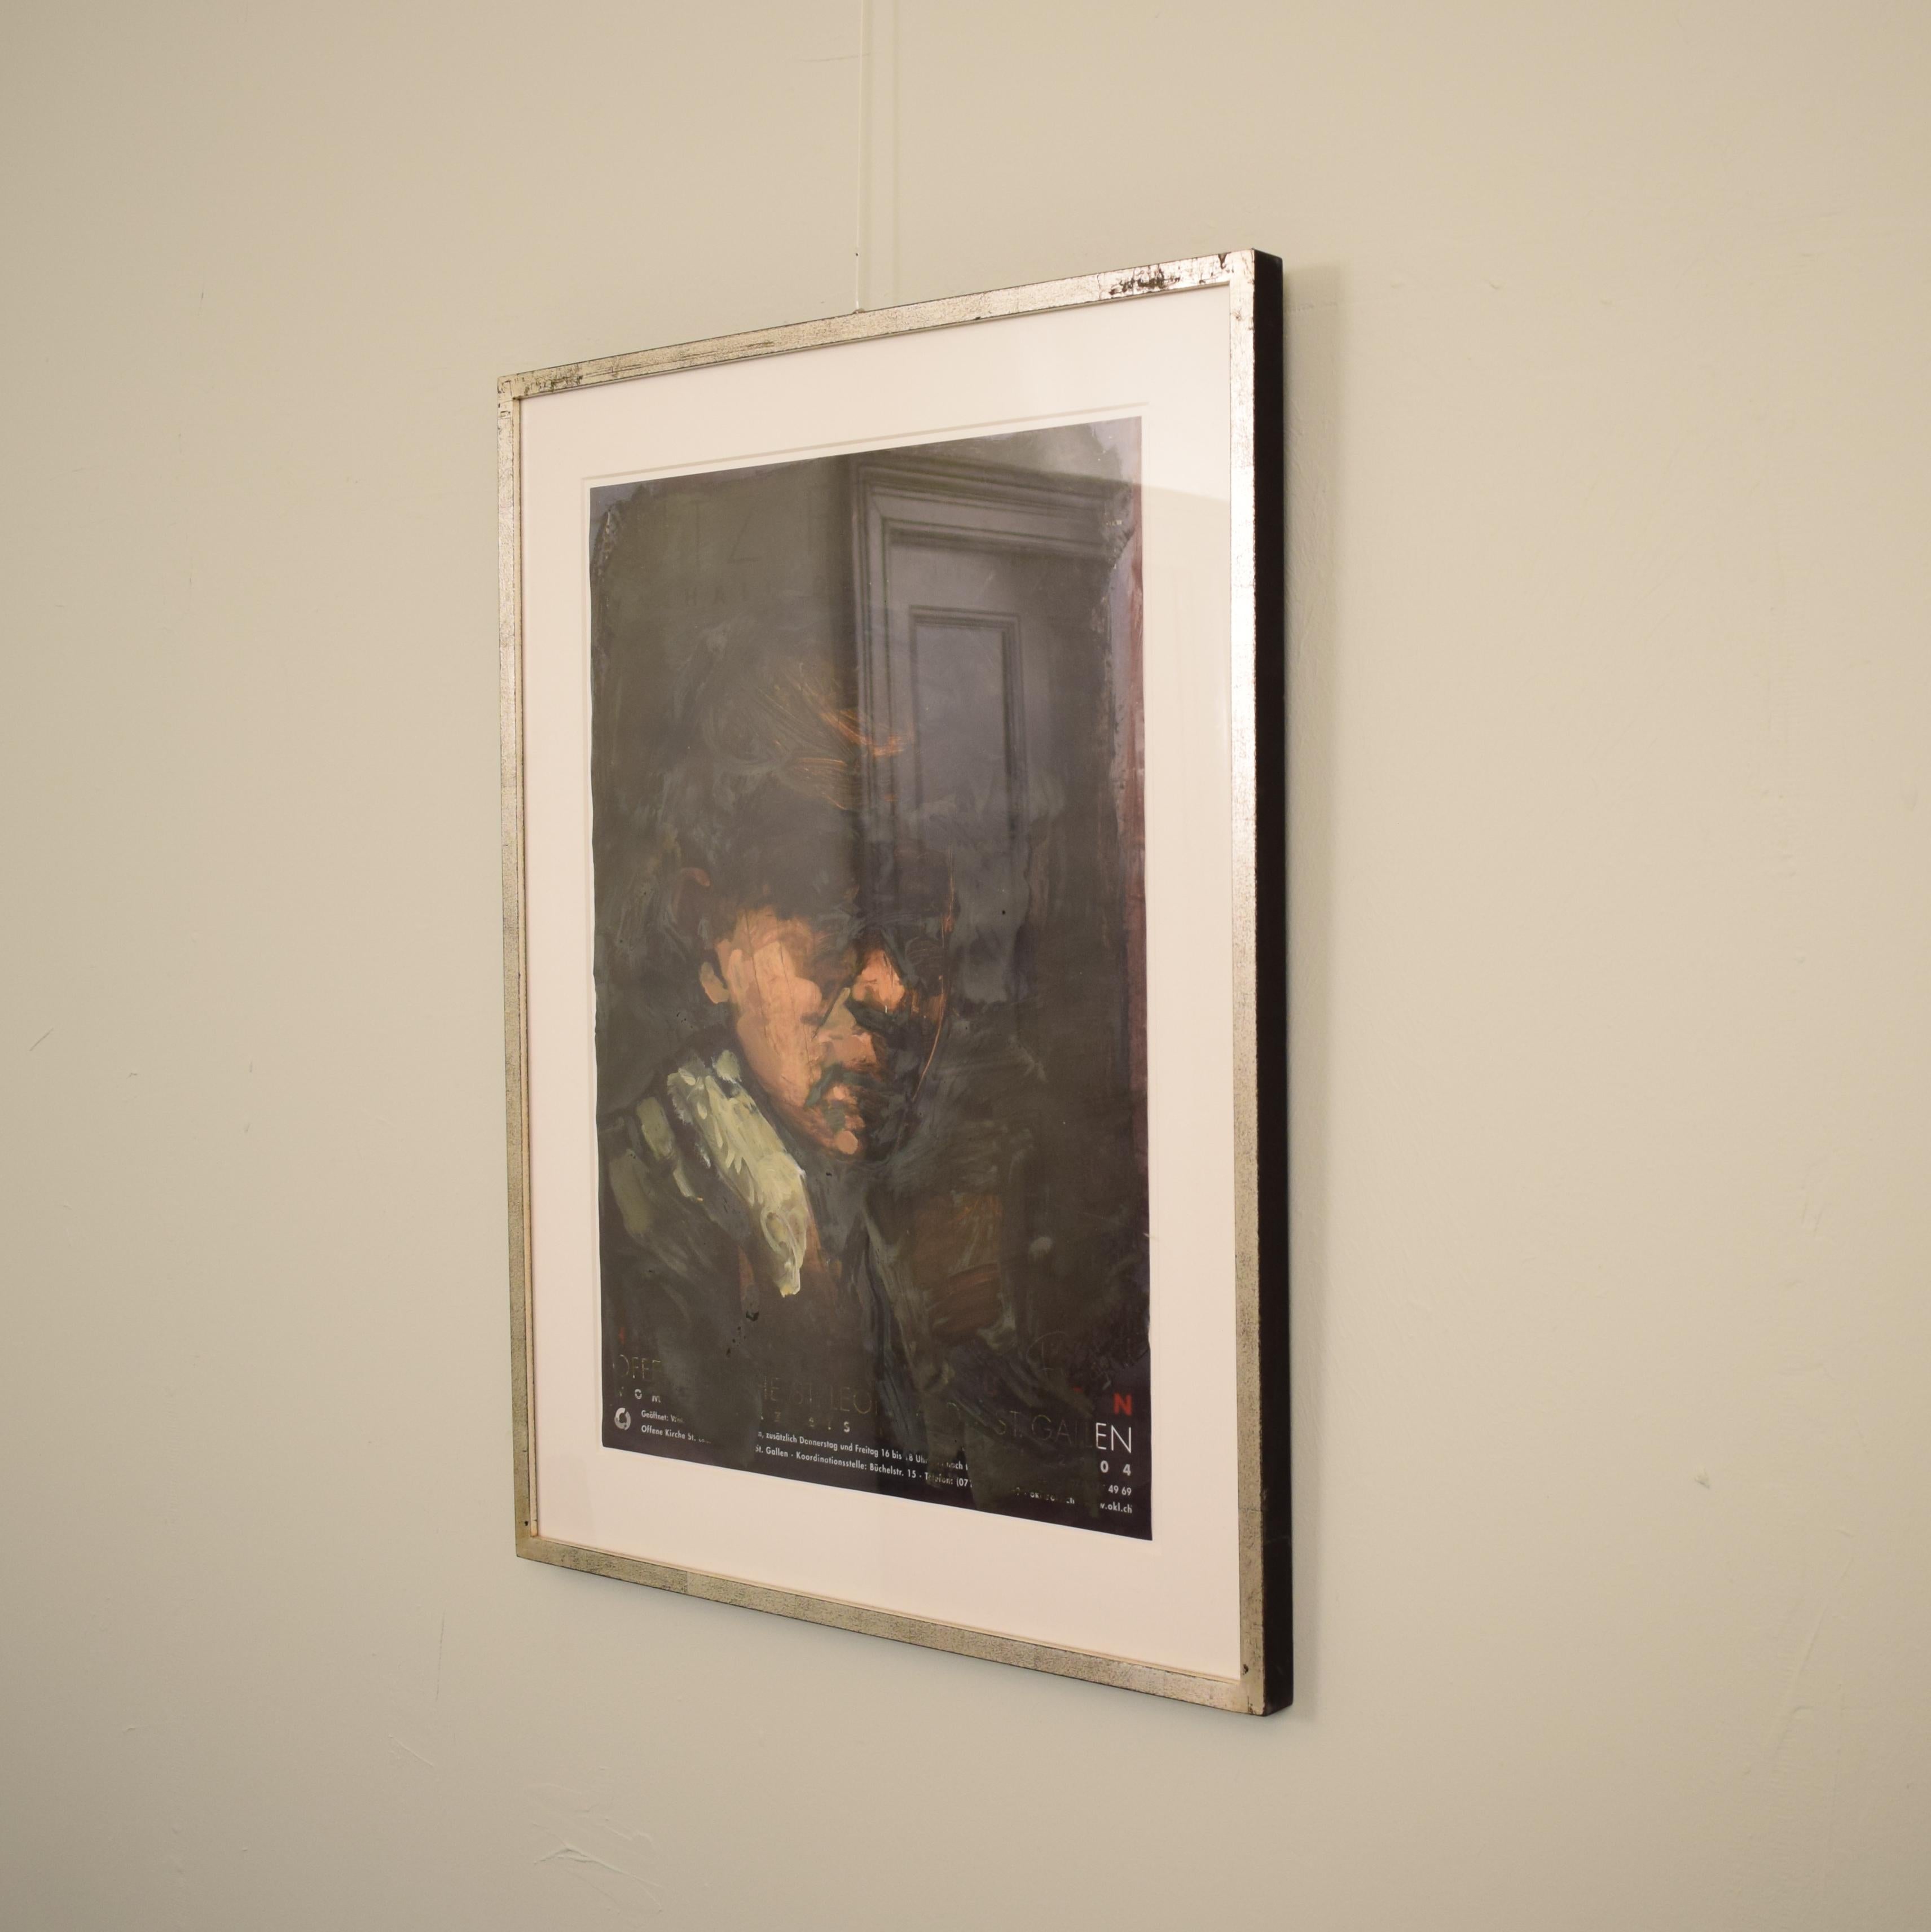 This very well painted and framed oil painting by Lutz Friedel is from his exhibition:

Counterimages, afterimages
my self-portraits between 1635 and 2008
Painting over exhibition posters, oil • 59.4 x 42 cm

